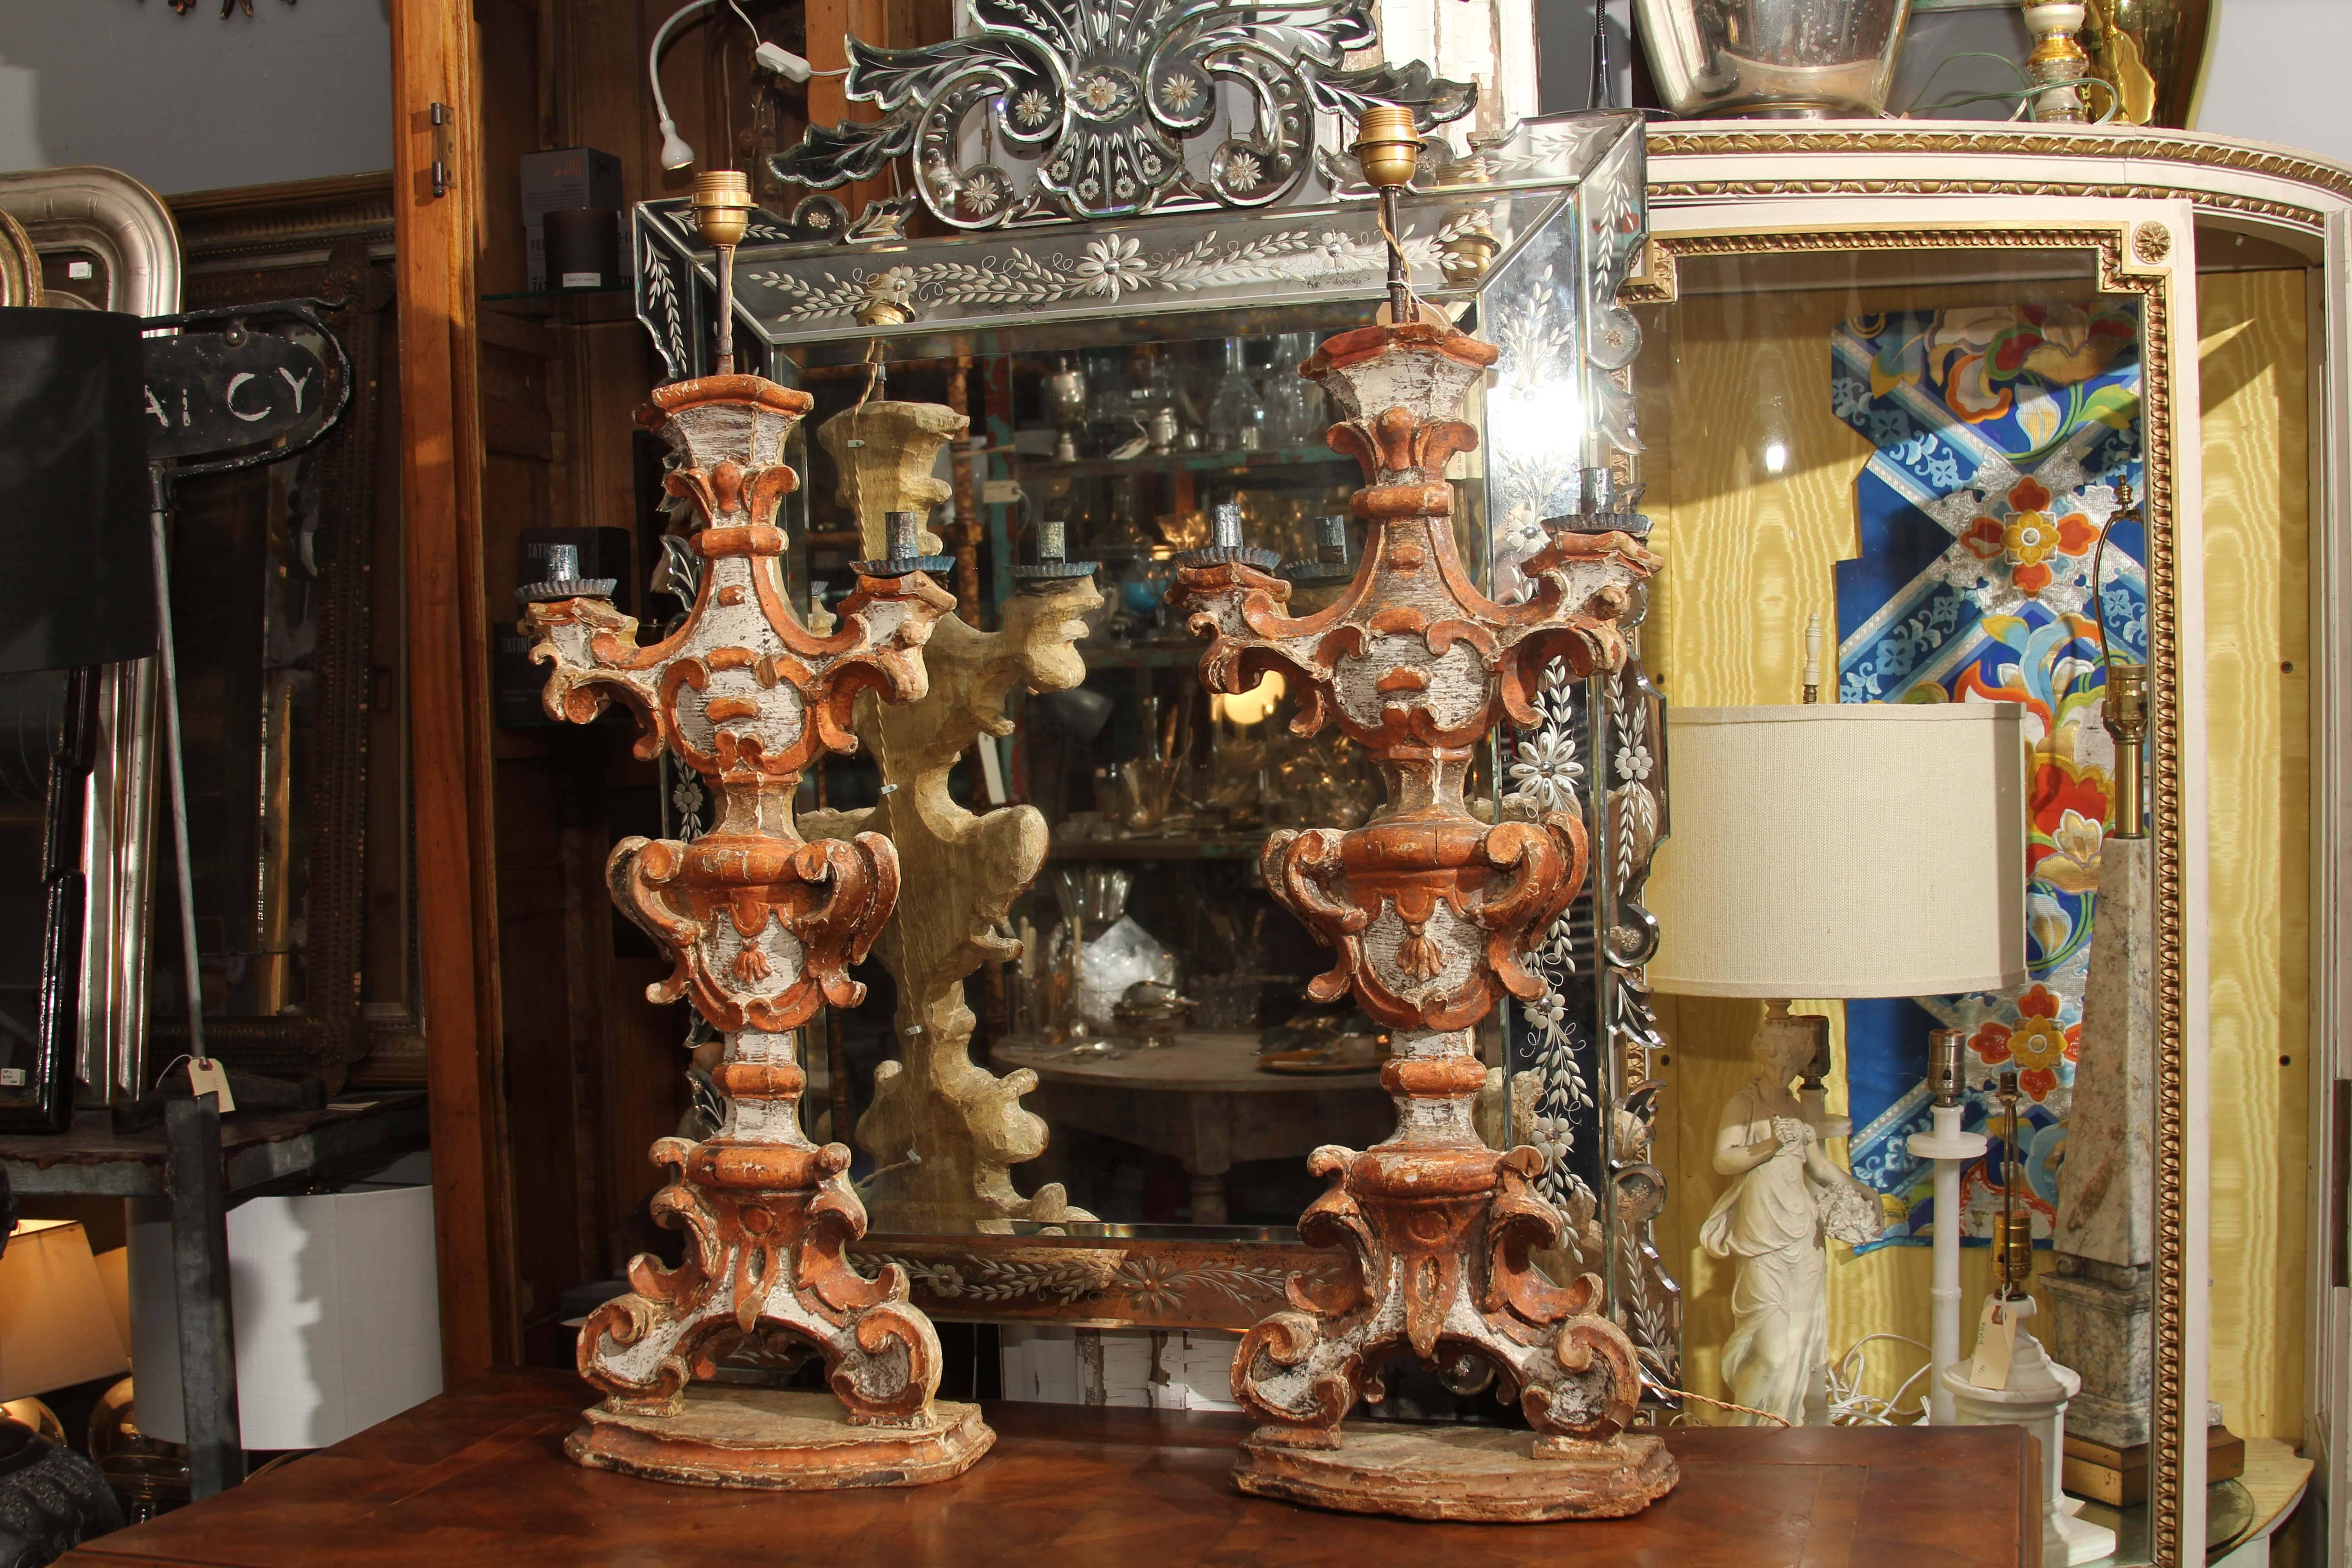 18th century Italian hand-carved wood candlesticks with aged finish of coral and white with remnants of silver two metal candle holders remain on each; the upper was removed to house the European bulb and wiring.
Grand size and beautiful patina and